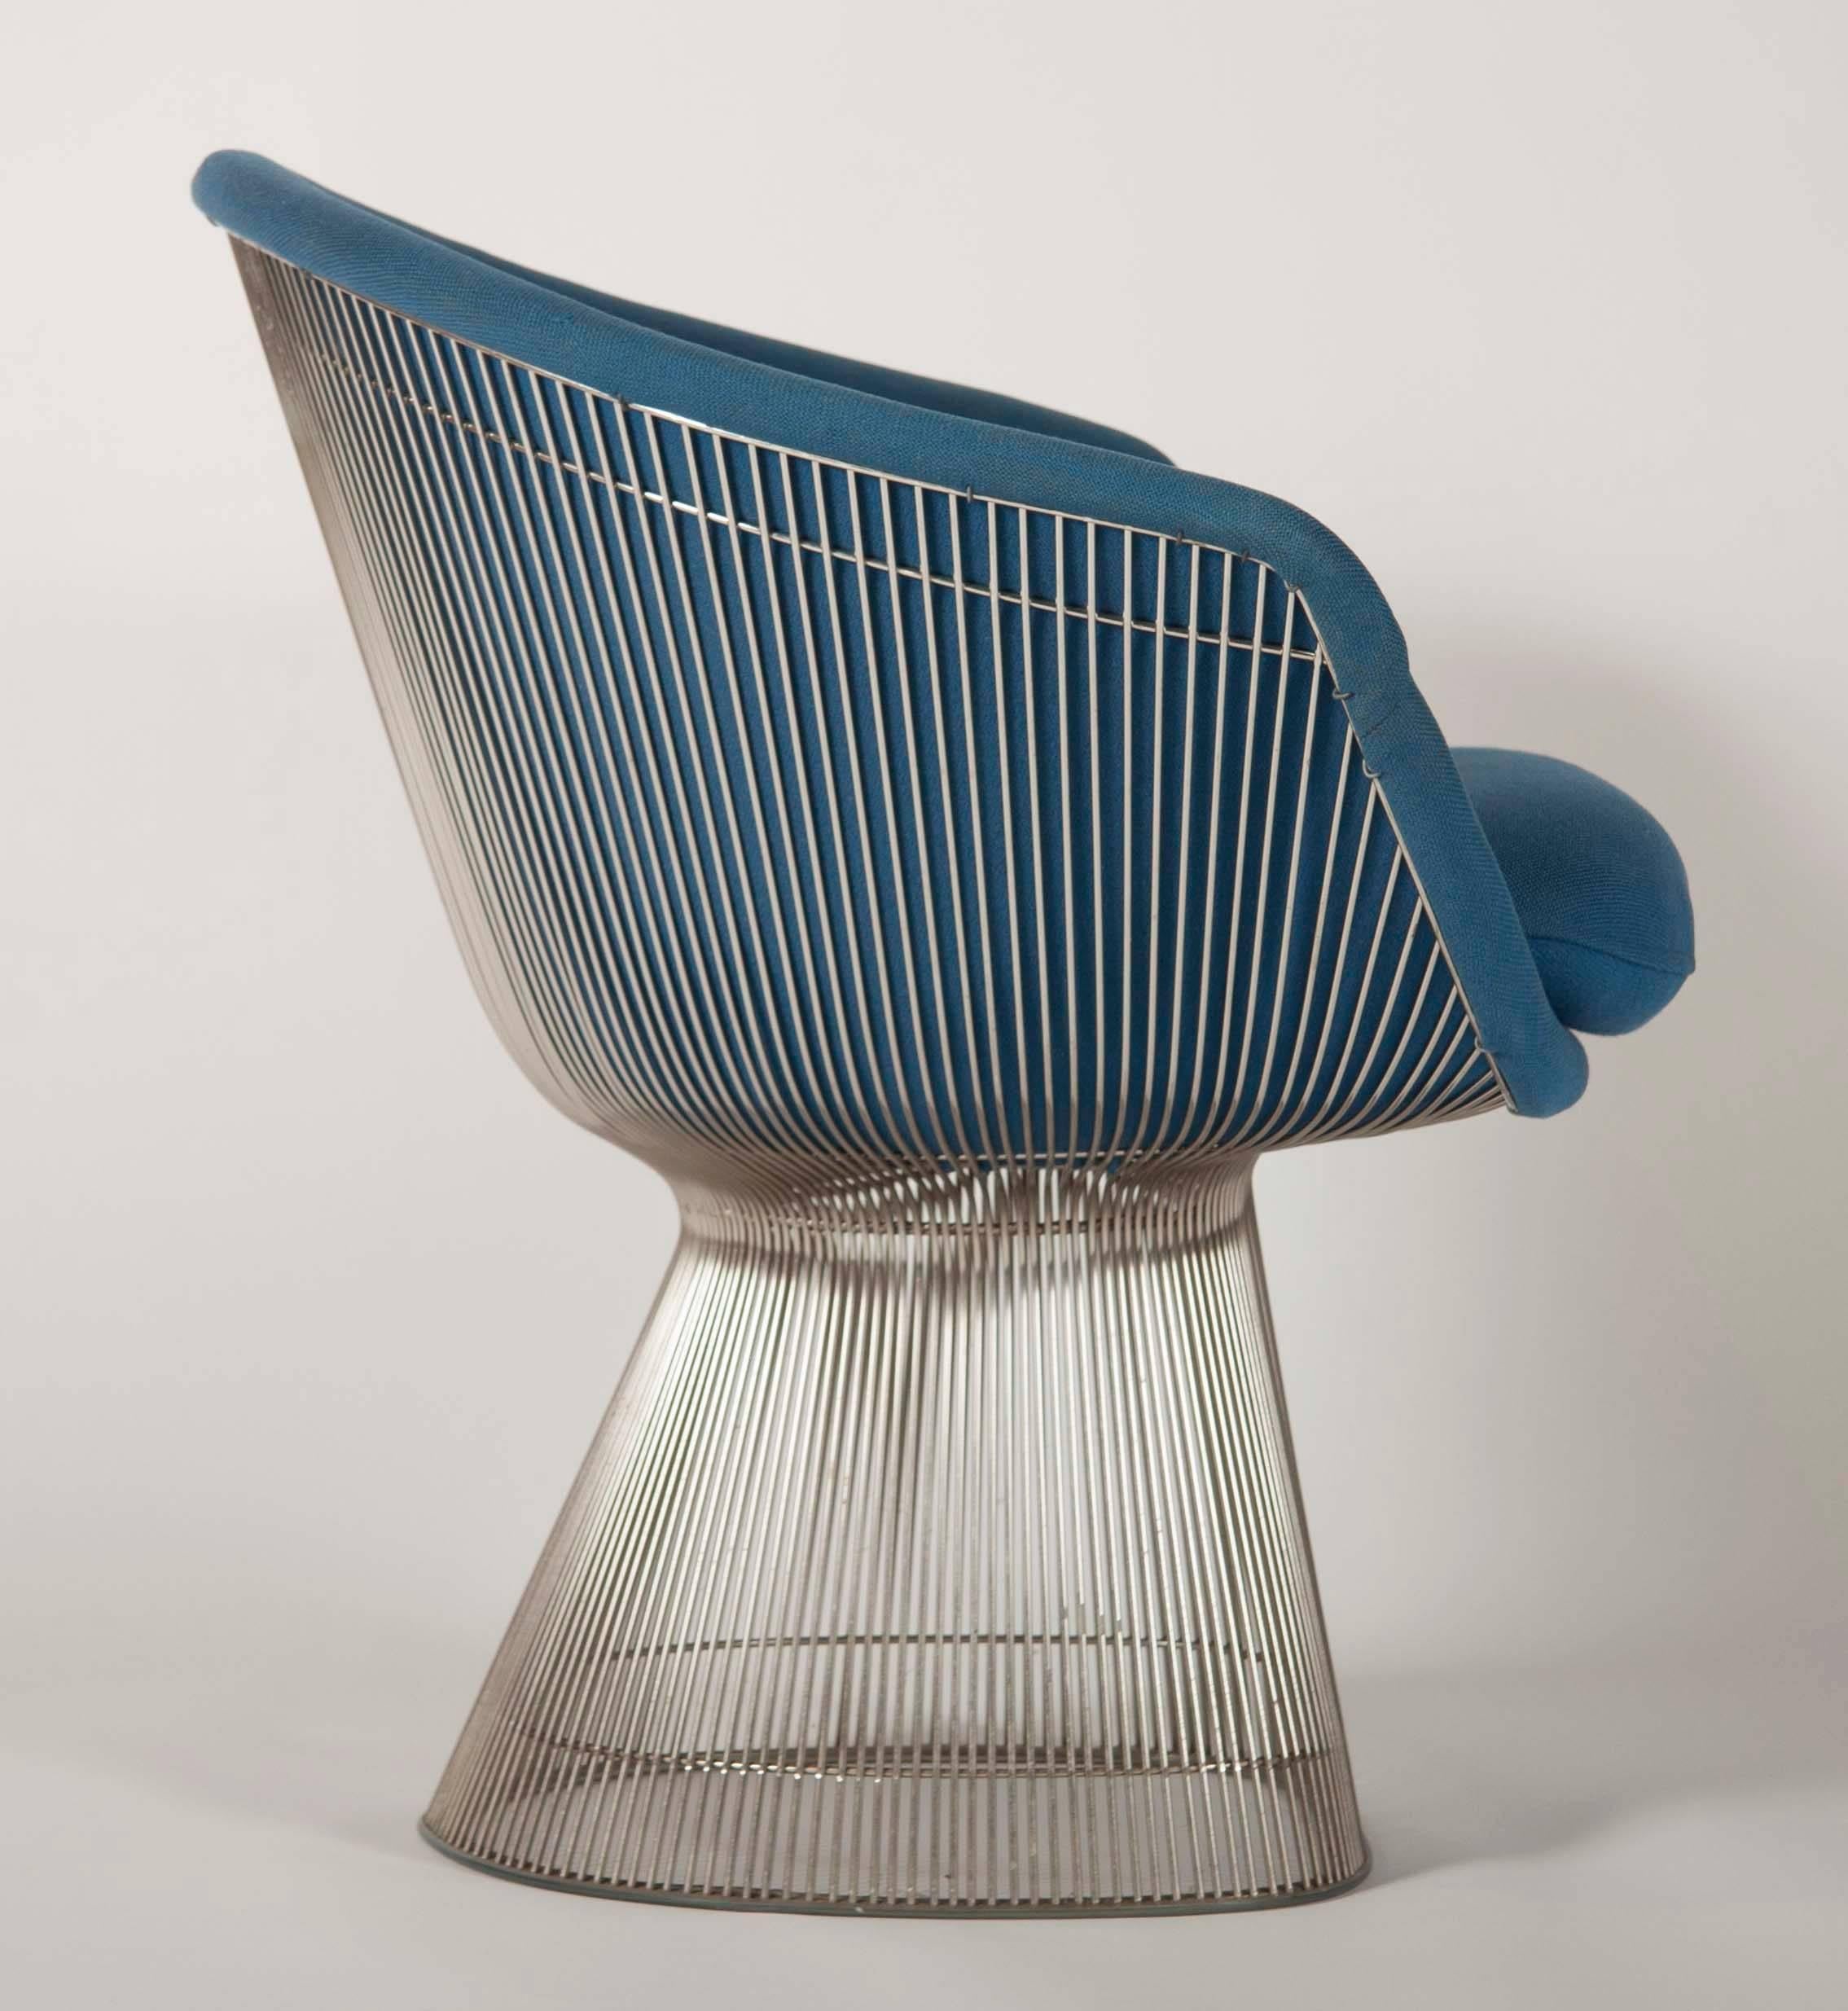 A pair of blue wool upholstered Warren Platner lounge chairs. Chairs are executed in nickel-plated steel. Platner label under cushion of both chairs marked December 10, 1980.